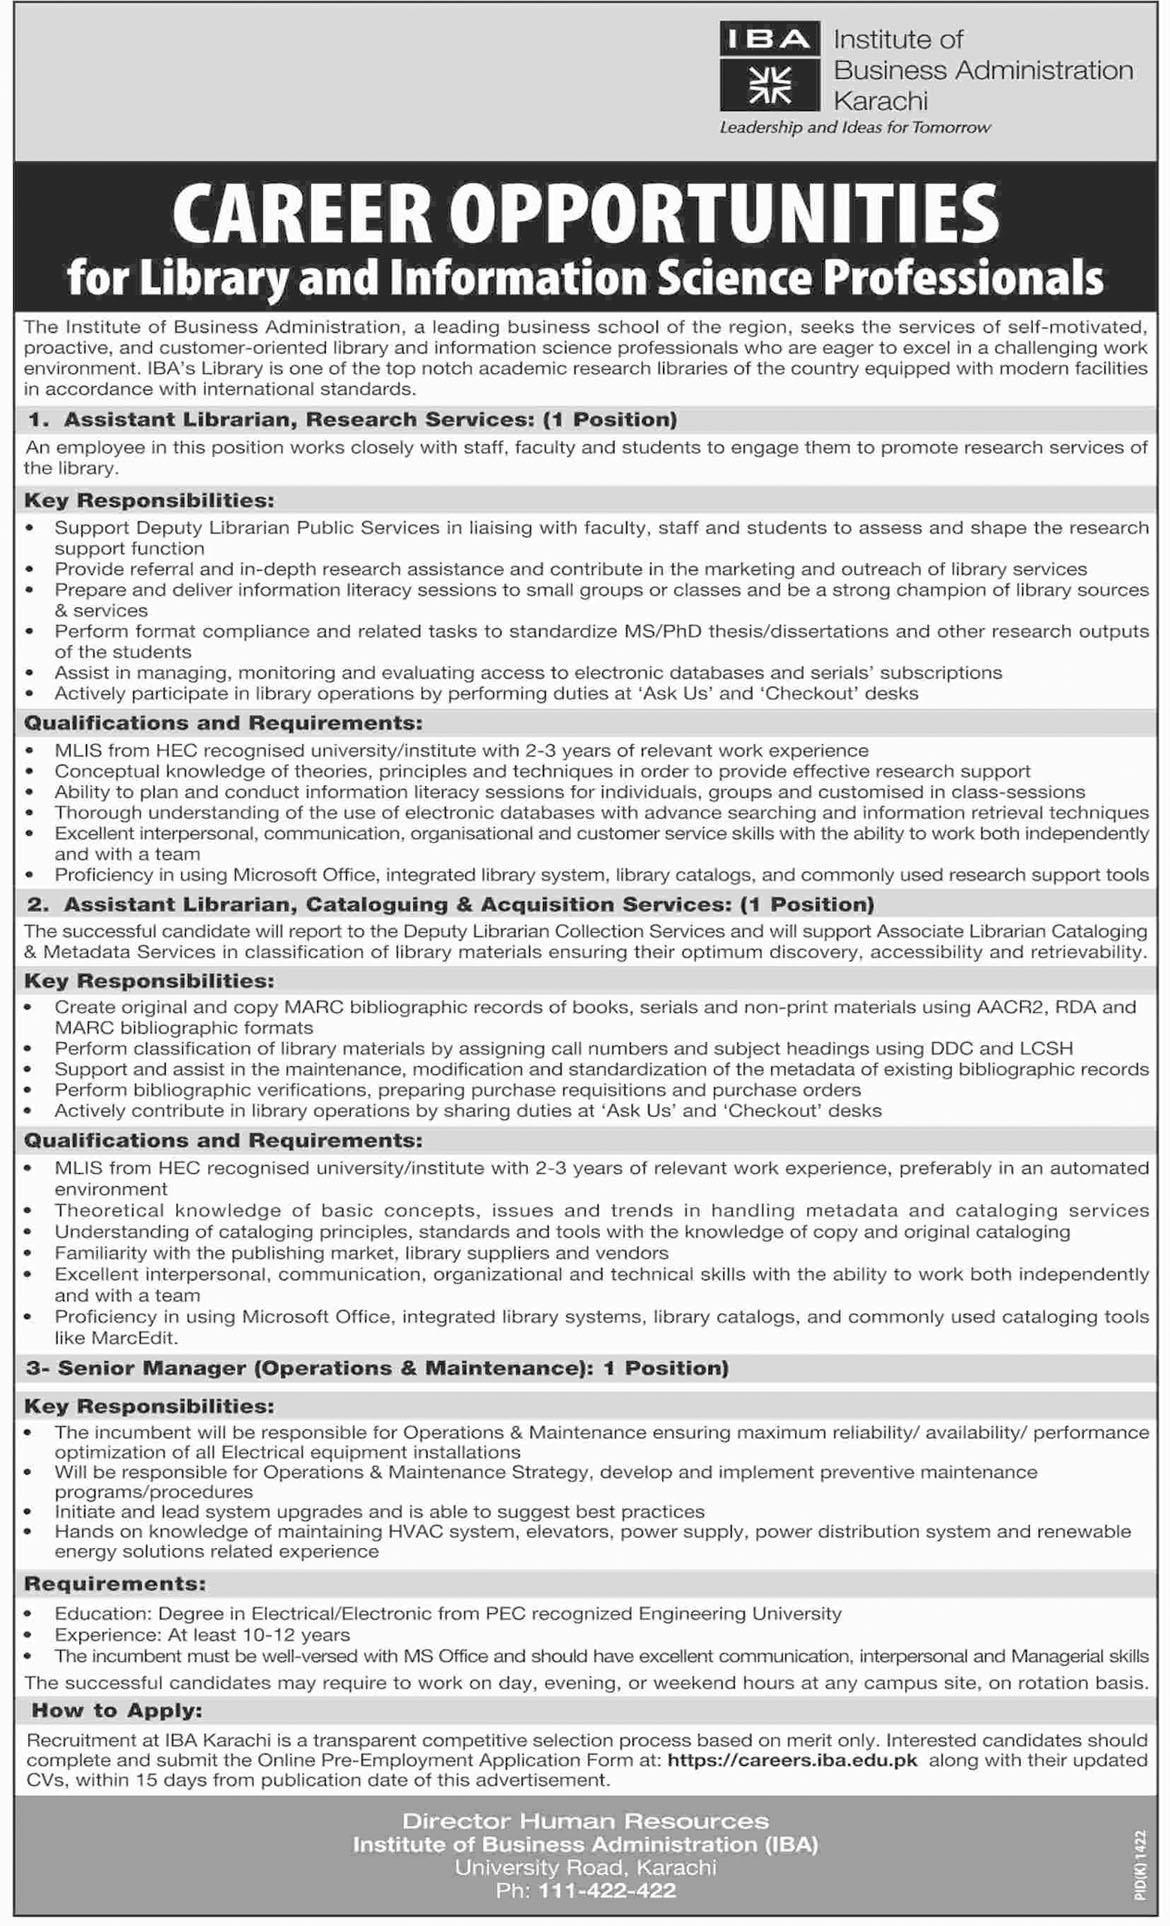 Jobs In Institute Of Business Administration Karachi 19 Oct 2018